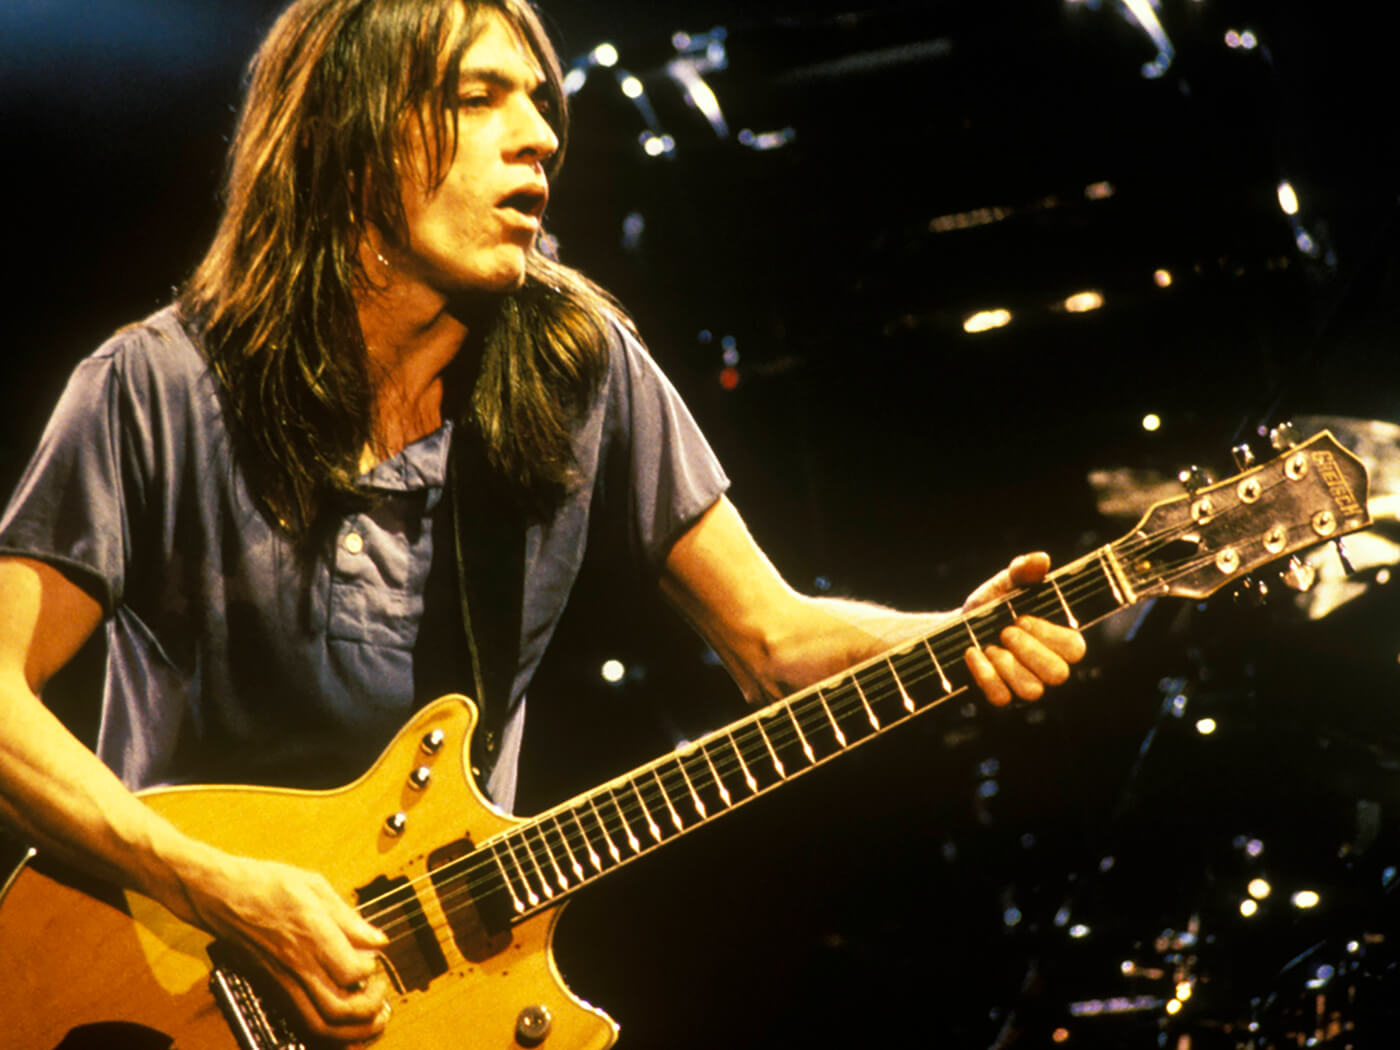 Malcolm Young of AC/DC performing with his Gretsch 6131 Jet Firebird by Bob King/Redferns via Getty Images